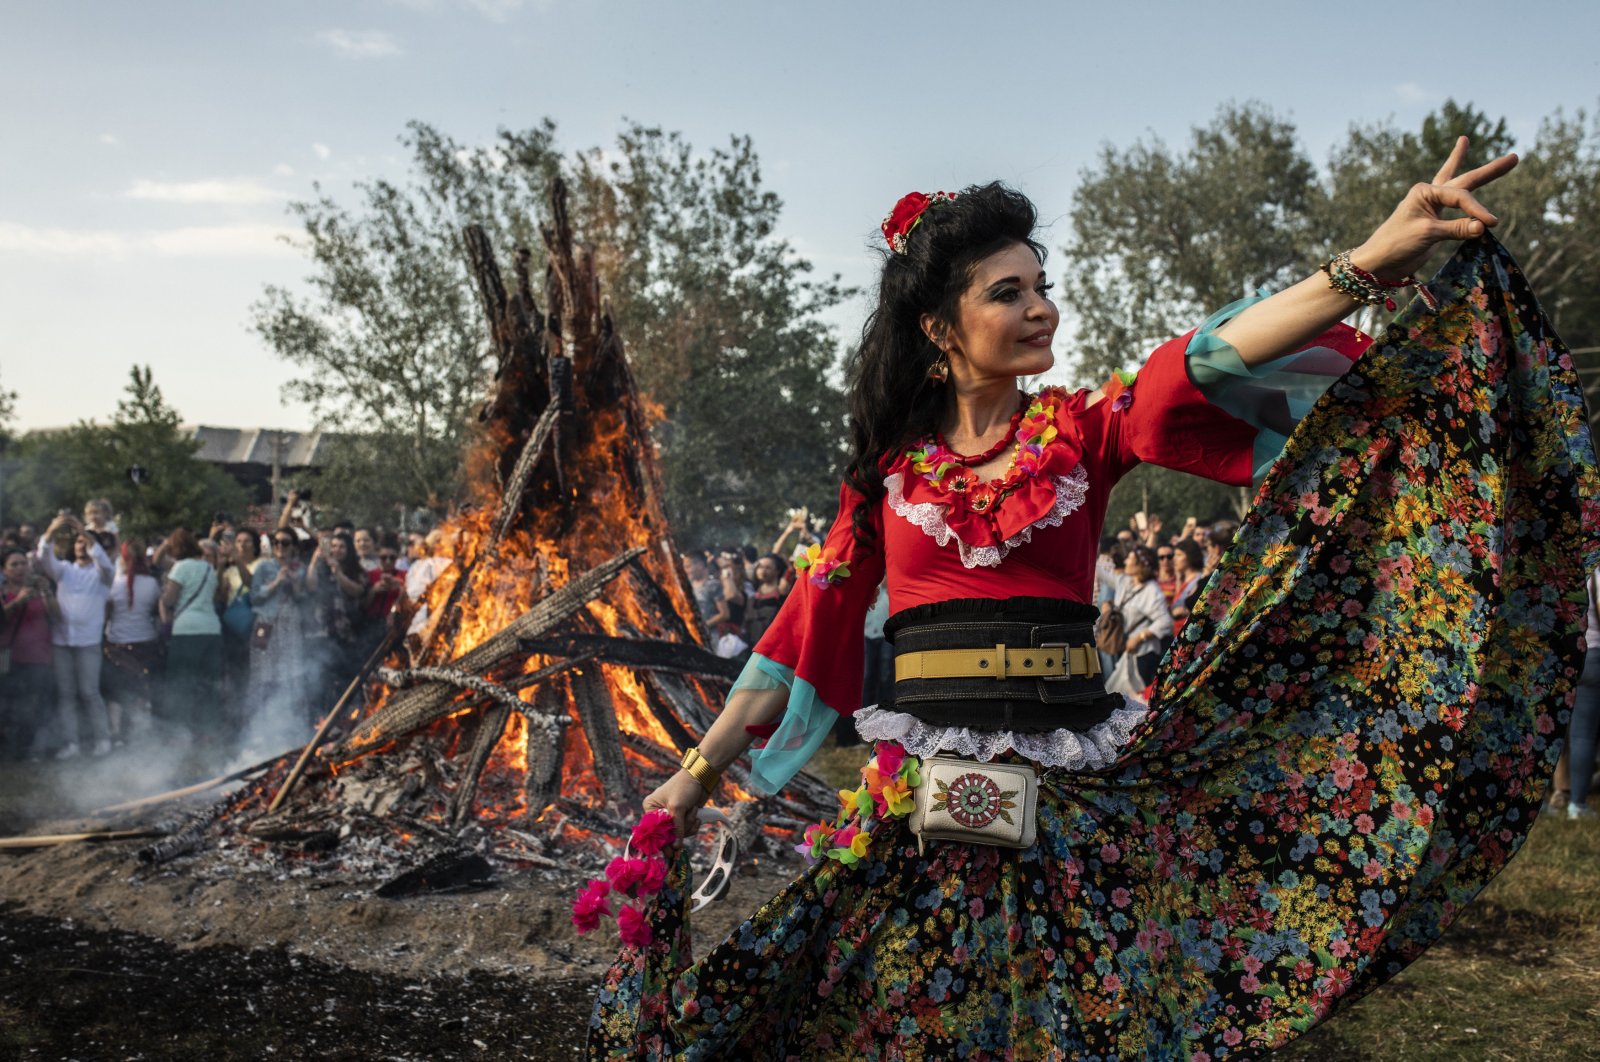 In this undated photo, a woman in traditional attire dances during the Kakava (Hıdırellez) celebrations in the border province of Edirne. (DHA Photo)